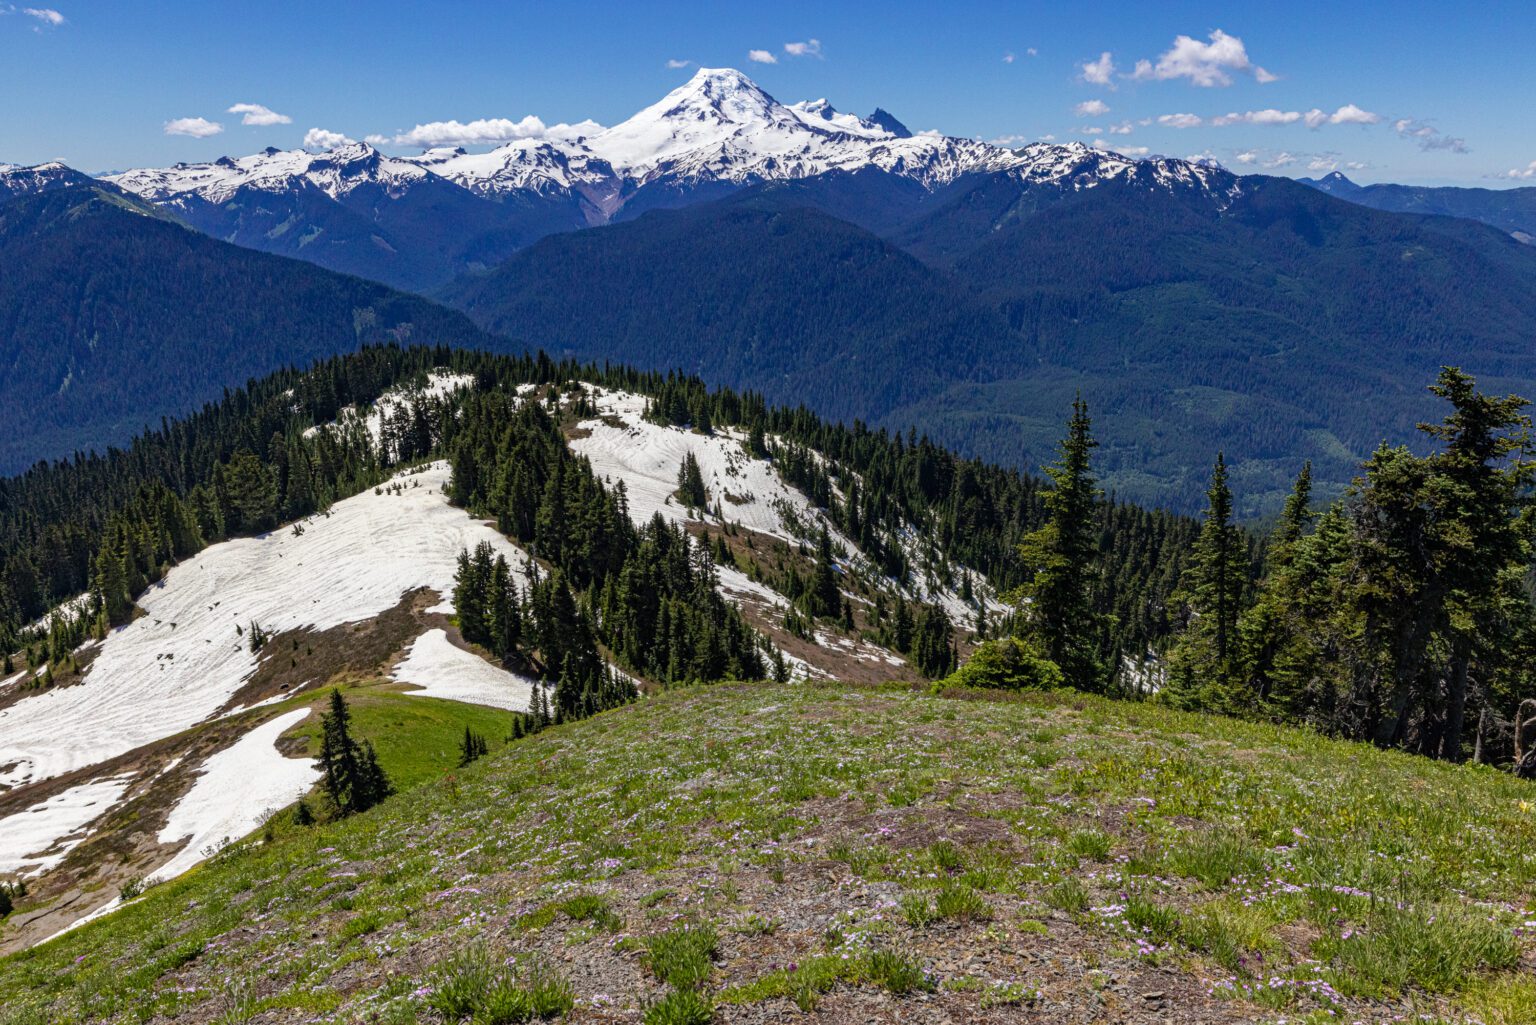 Glacial-covered Mount Baker